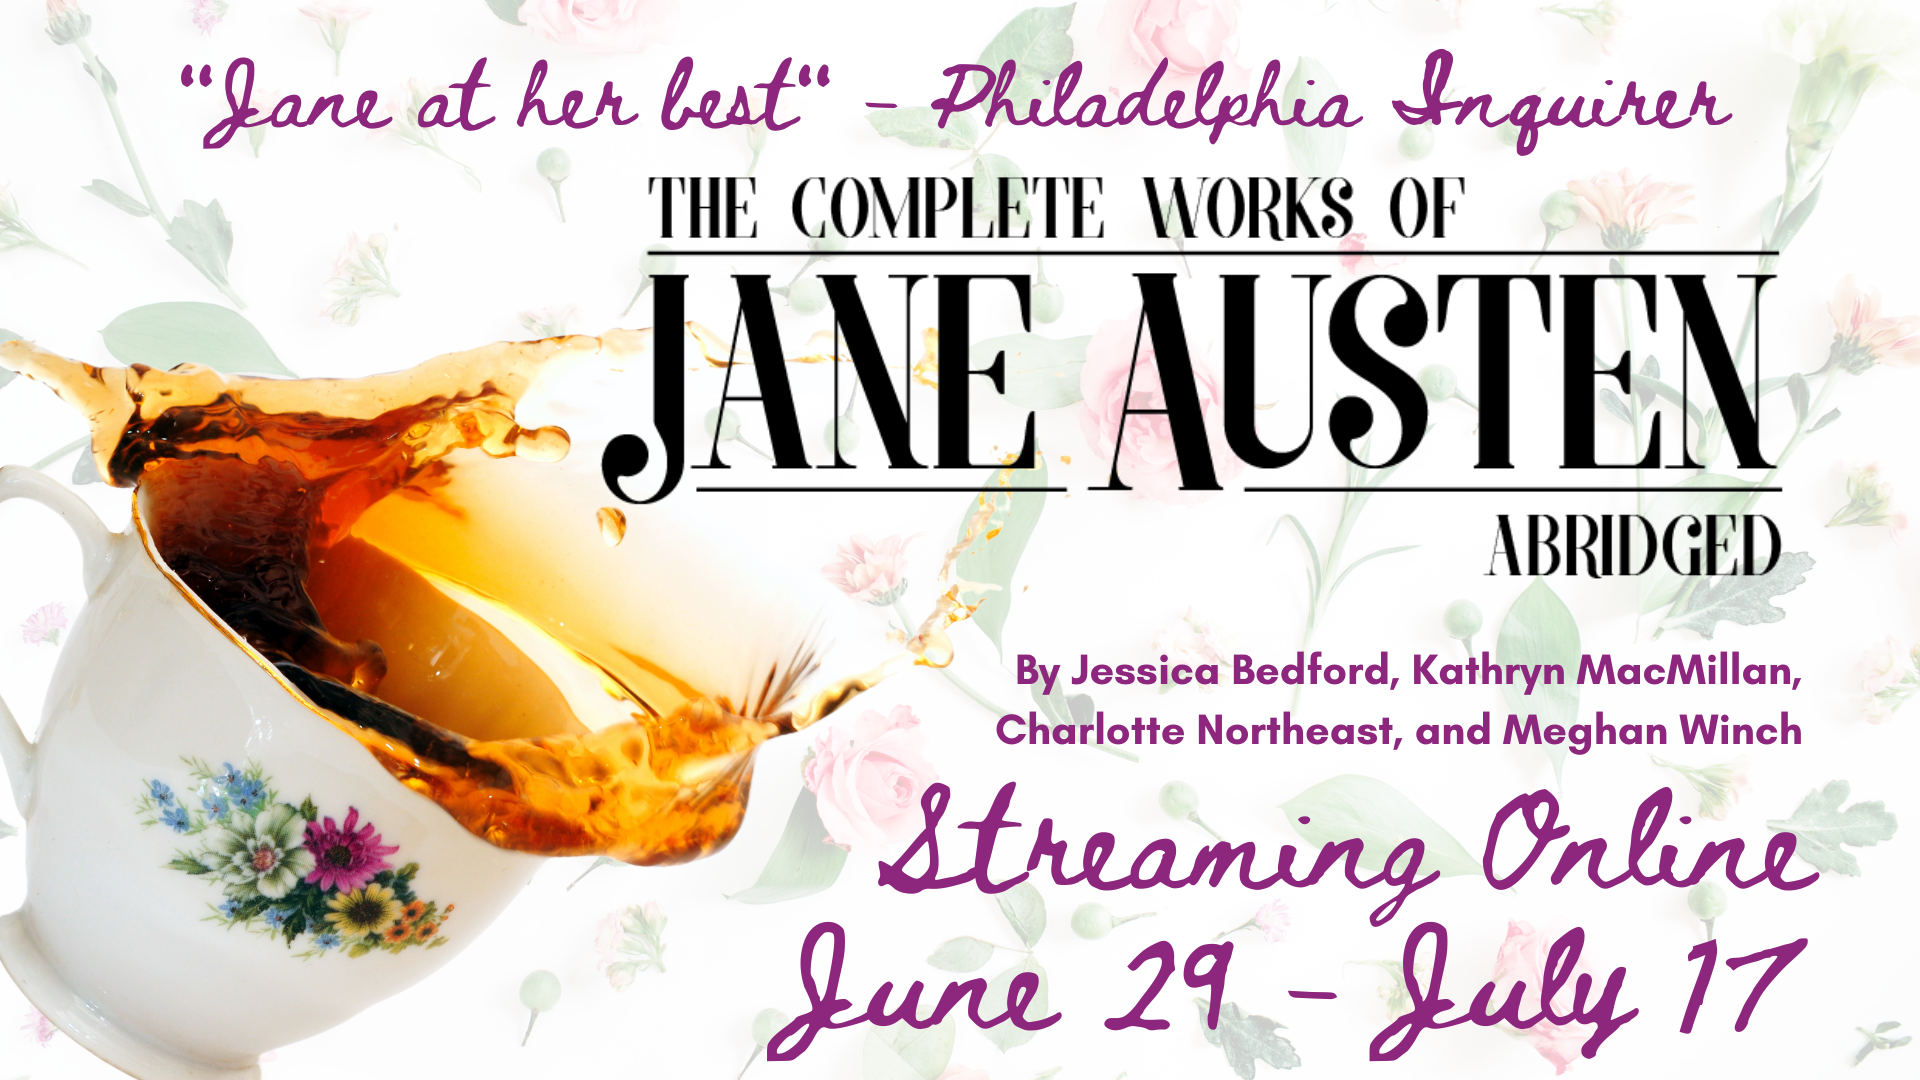 A teacup spills tea on a floral background. The logo and show details for THE COMPLETE WORKS OF JANE AUSTEN, ABRIDGED, Streaming June 29-July 17.